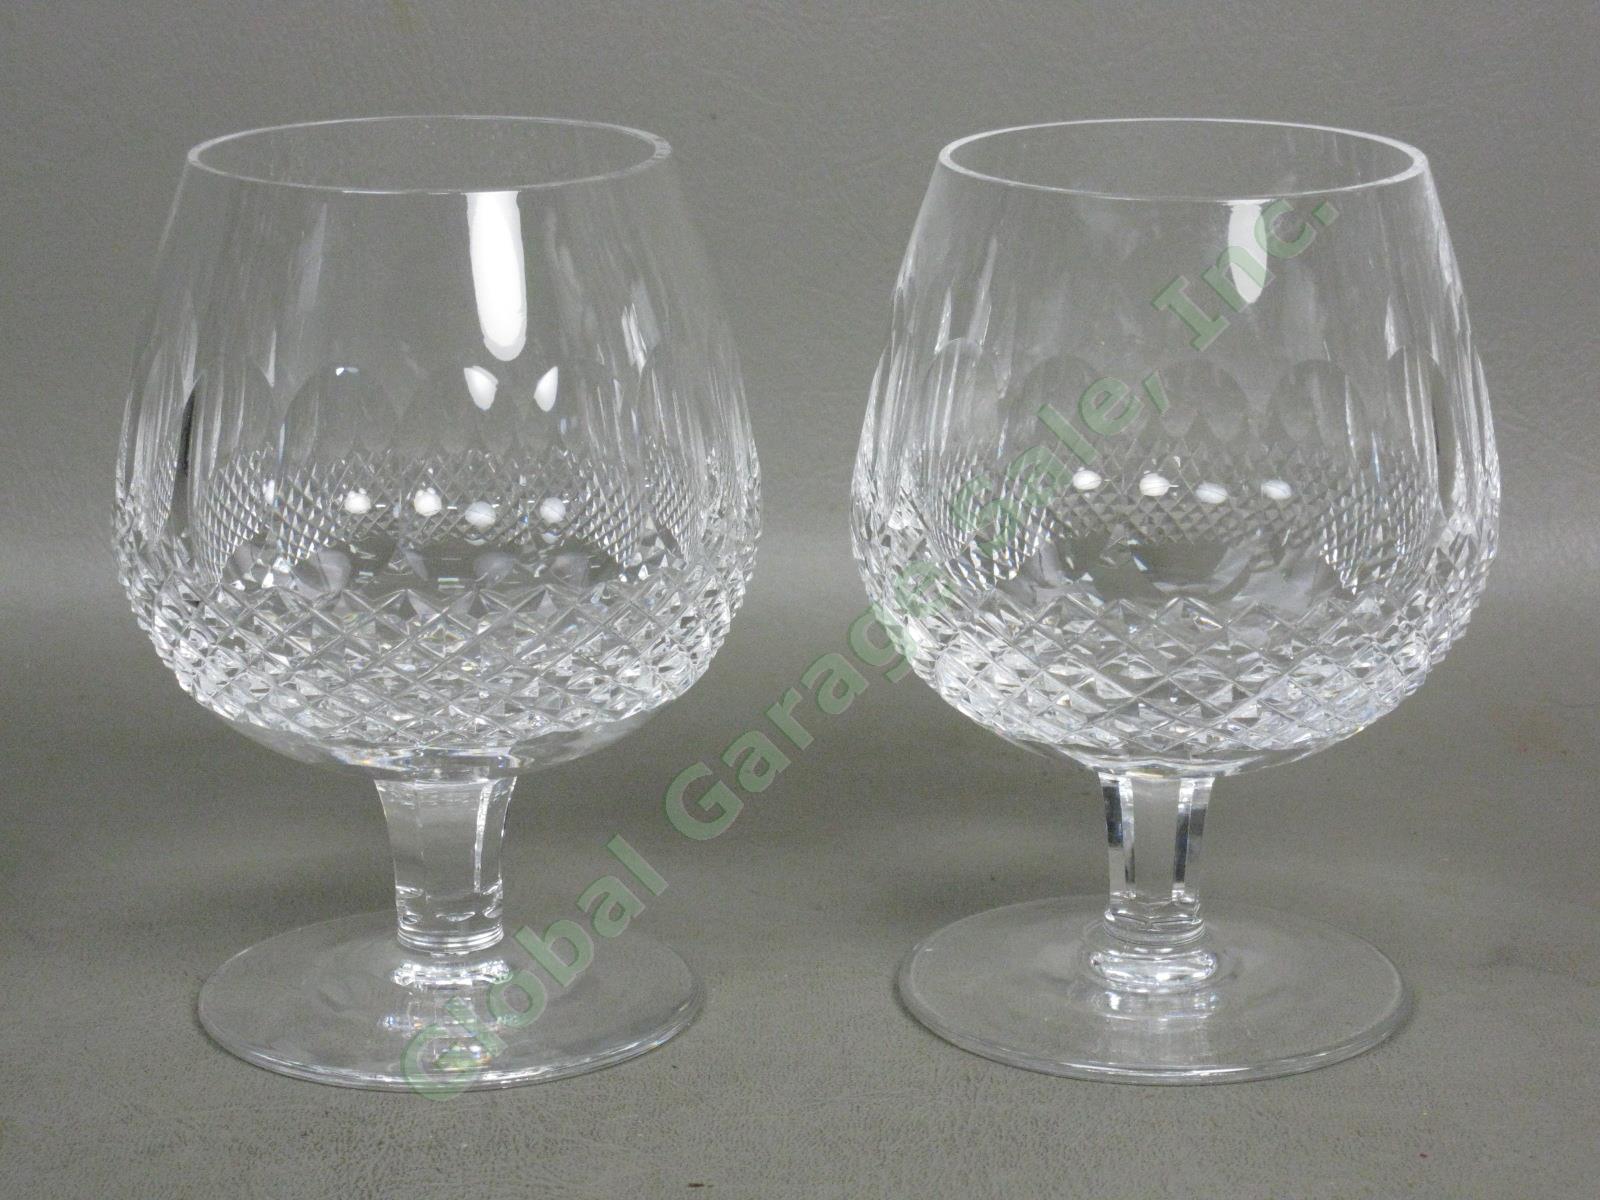 2 Waterford Cut Lead Crystal Colleen Brandy Snifter Glasses Pair Set Lot 5-1/8"